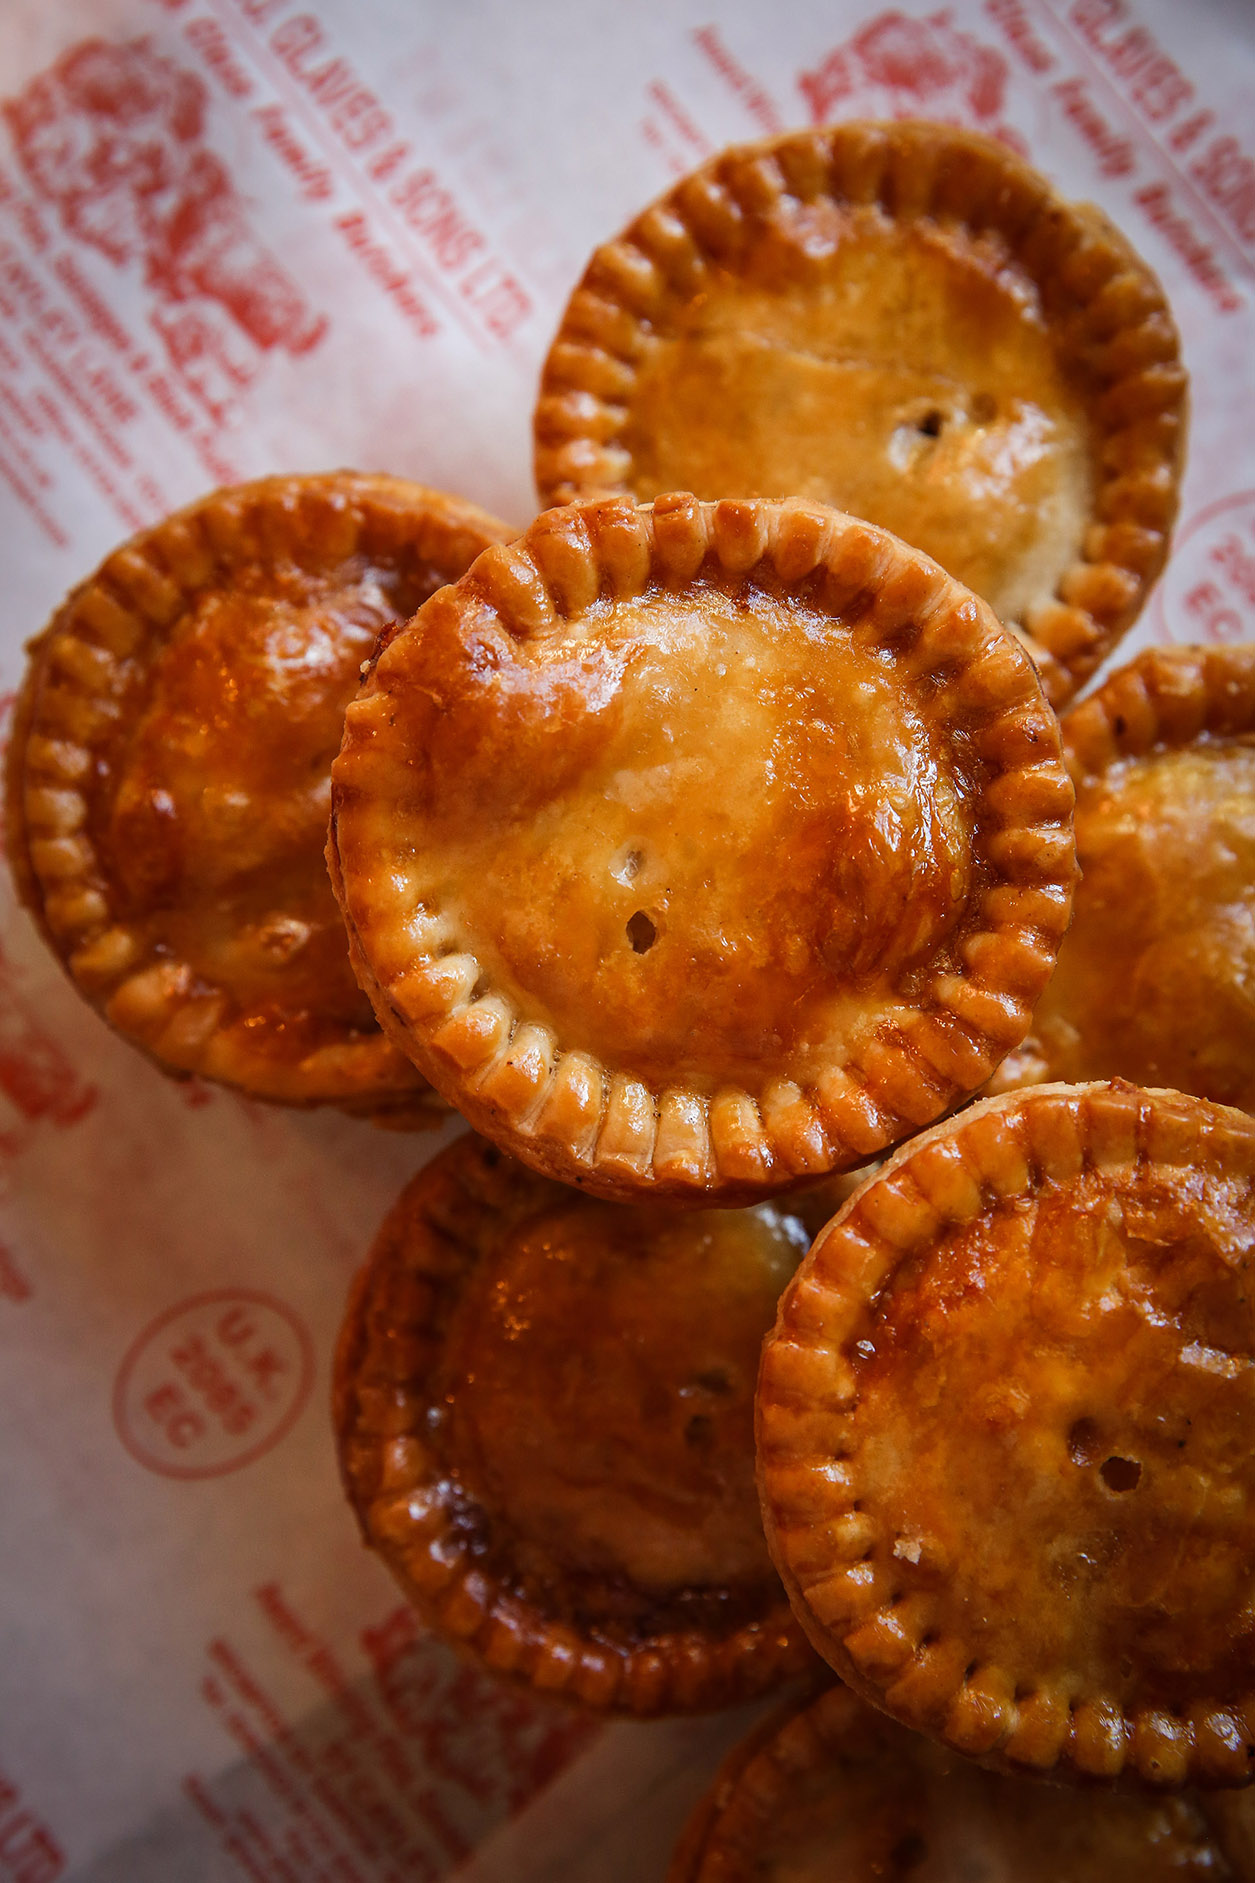 Stacked pork pies by Ceri Oakes